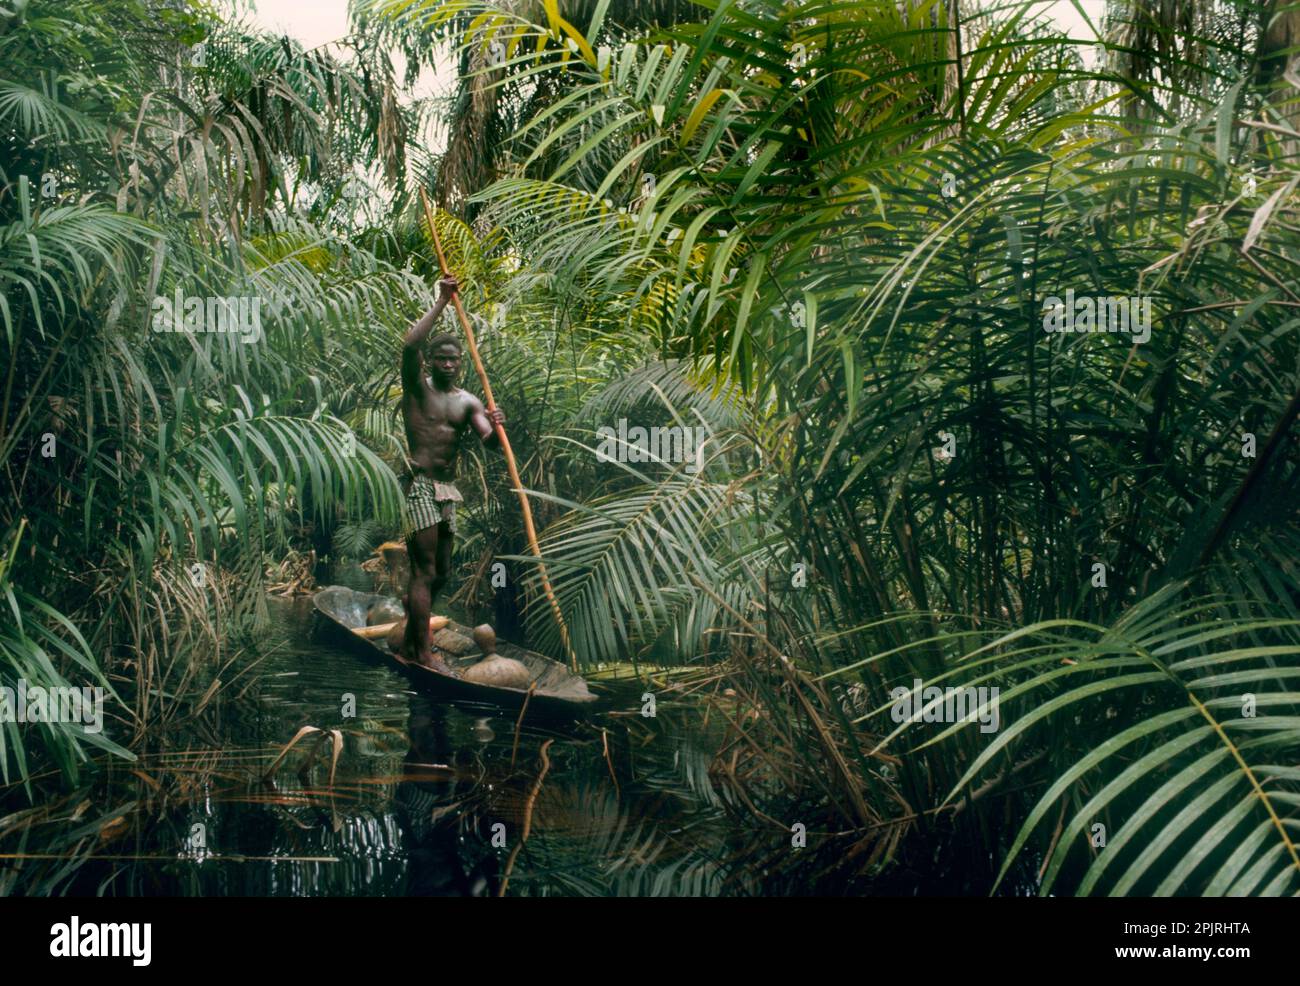 Africa, Libinza tribe, Ngiri River islands, Democratic Republic of the Congo. Man propelling canoe with pole in palm swamp forest. Stock Photo